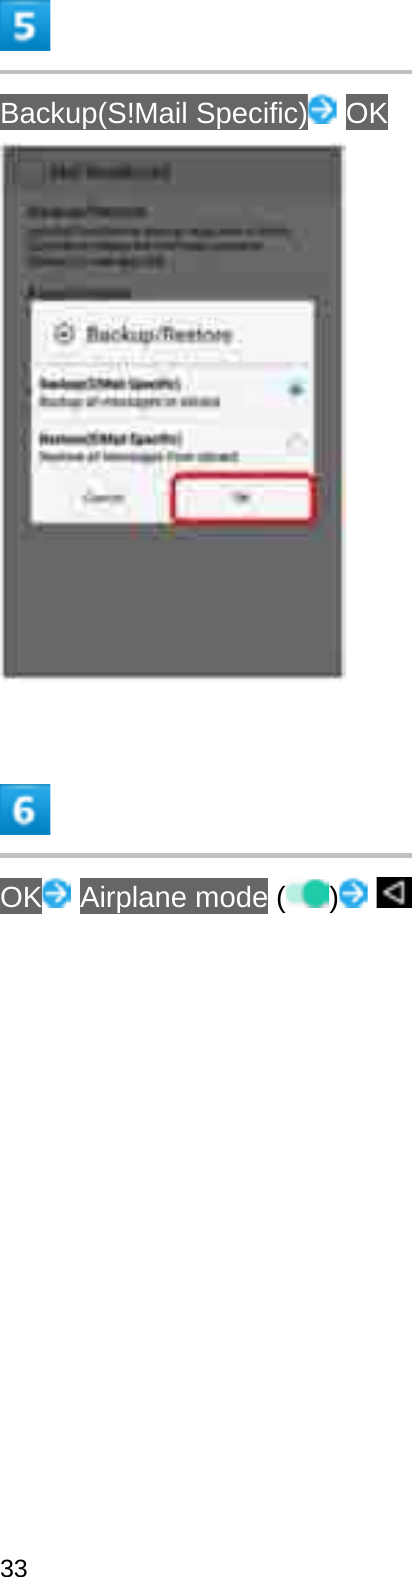 Backup(S!Mail Specific) OKOK Airplane mode ( )33